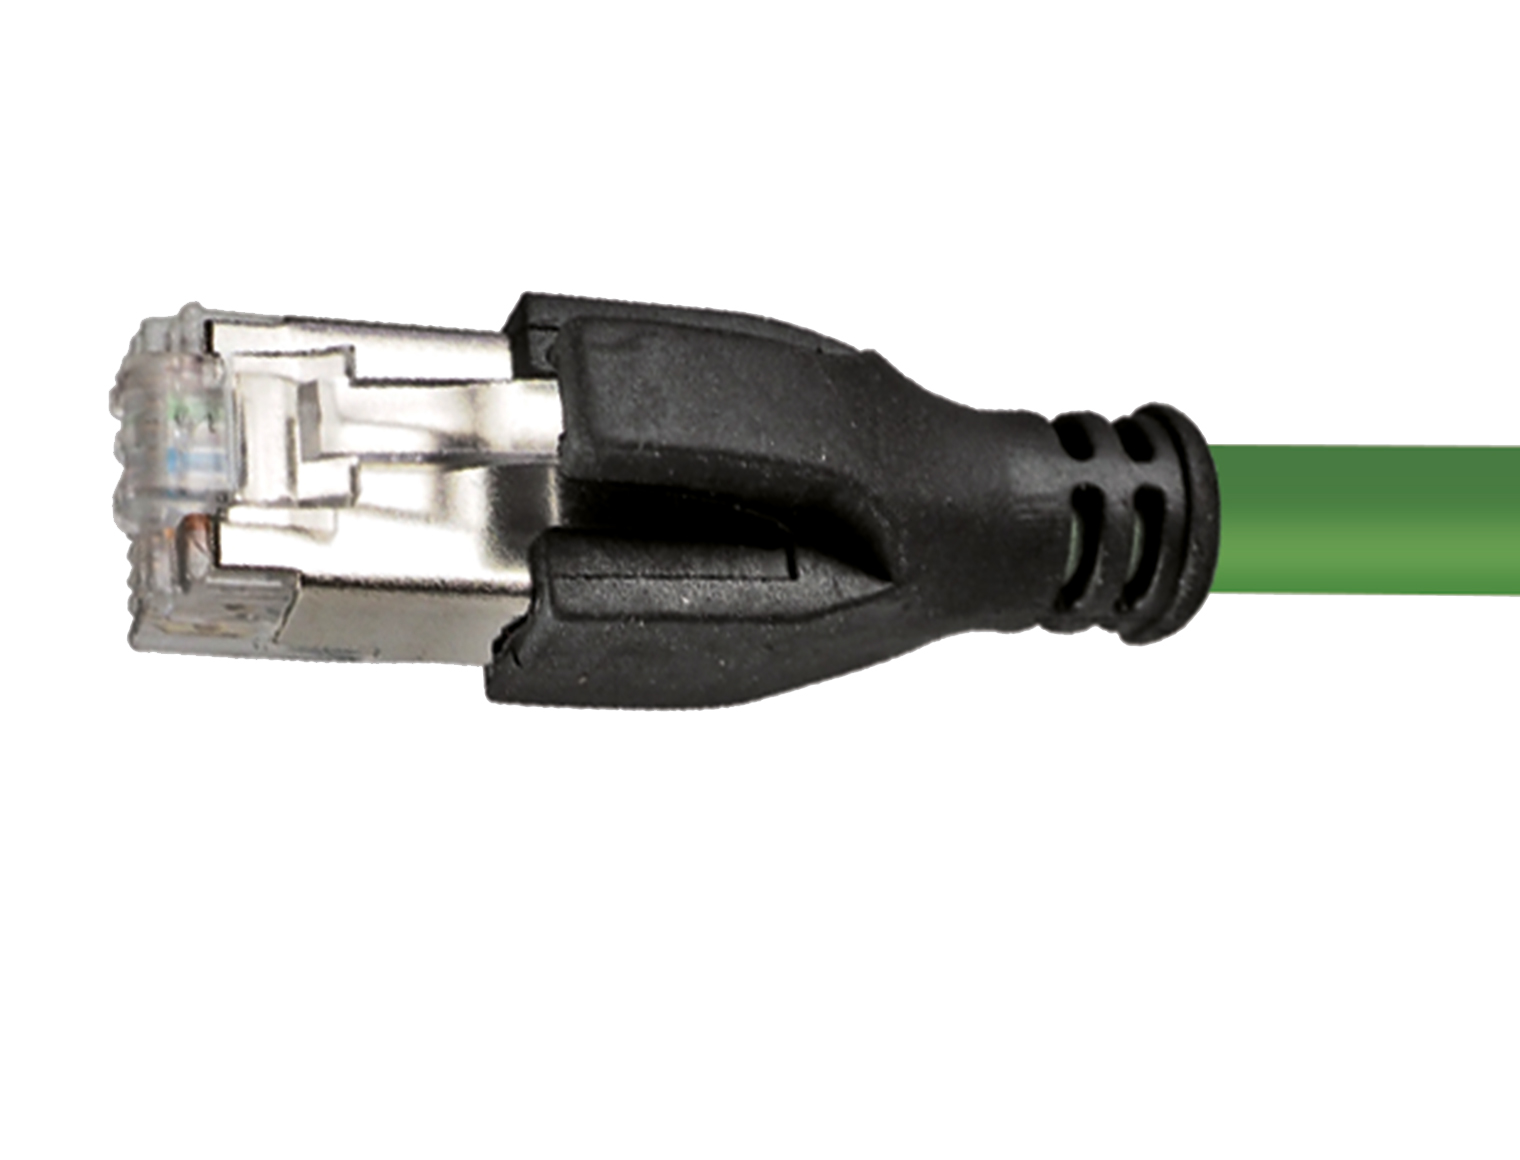 HELUKAT® CONNECTING SYSTEMS® INDUSTRY PROFInet B RJ 45 IP20 180°